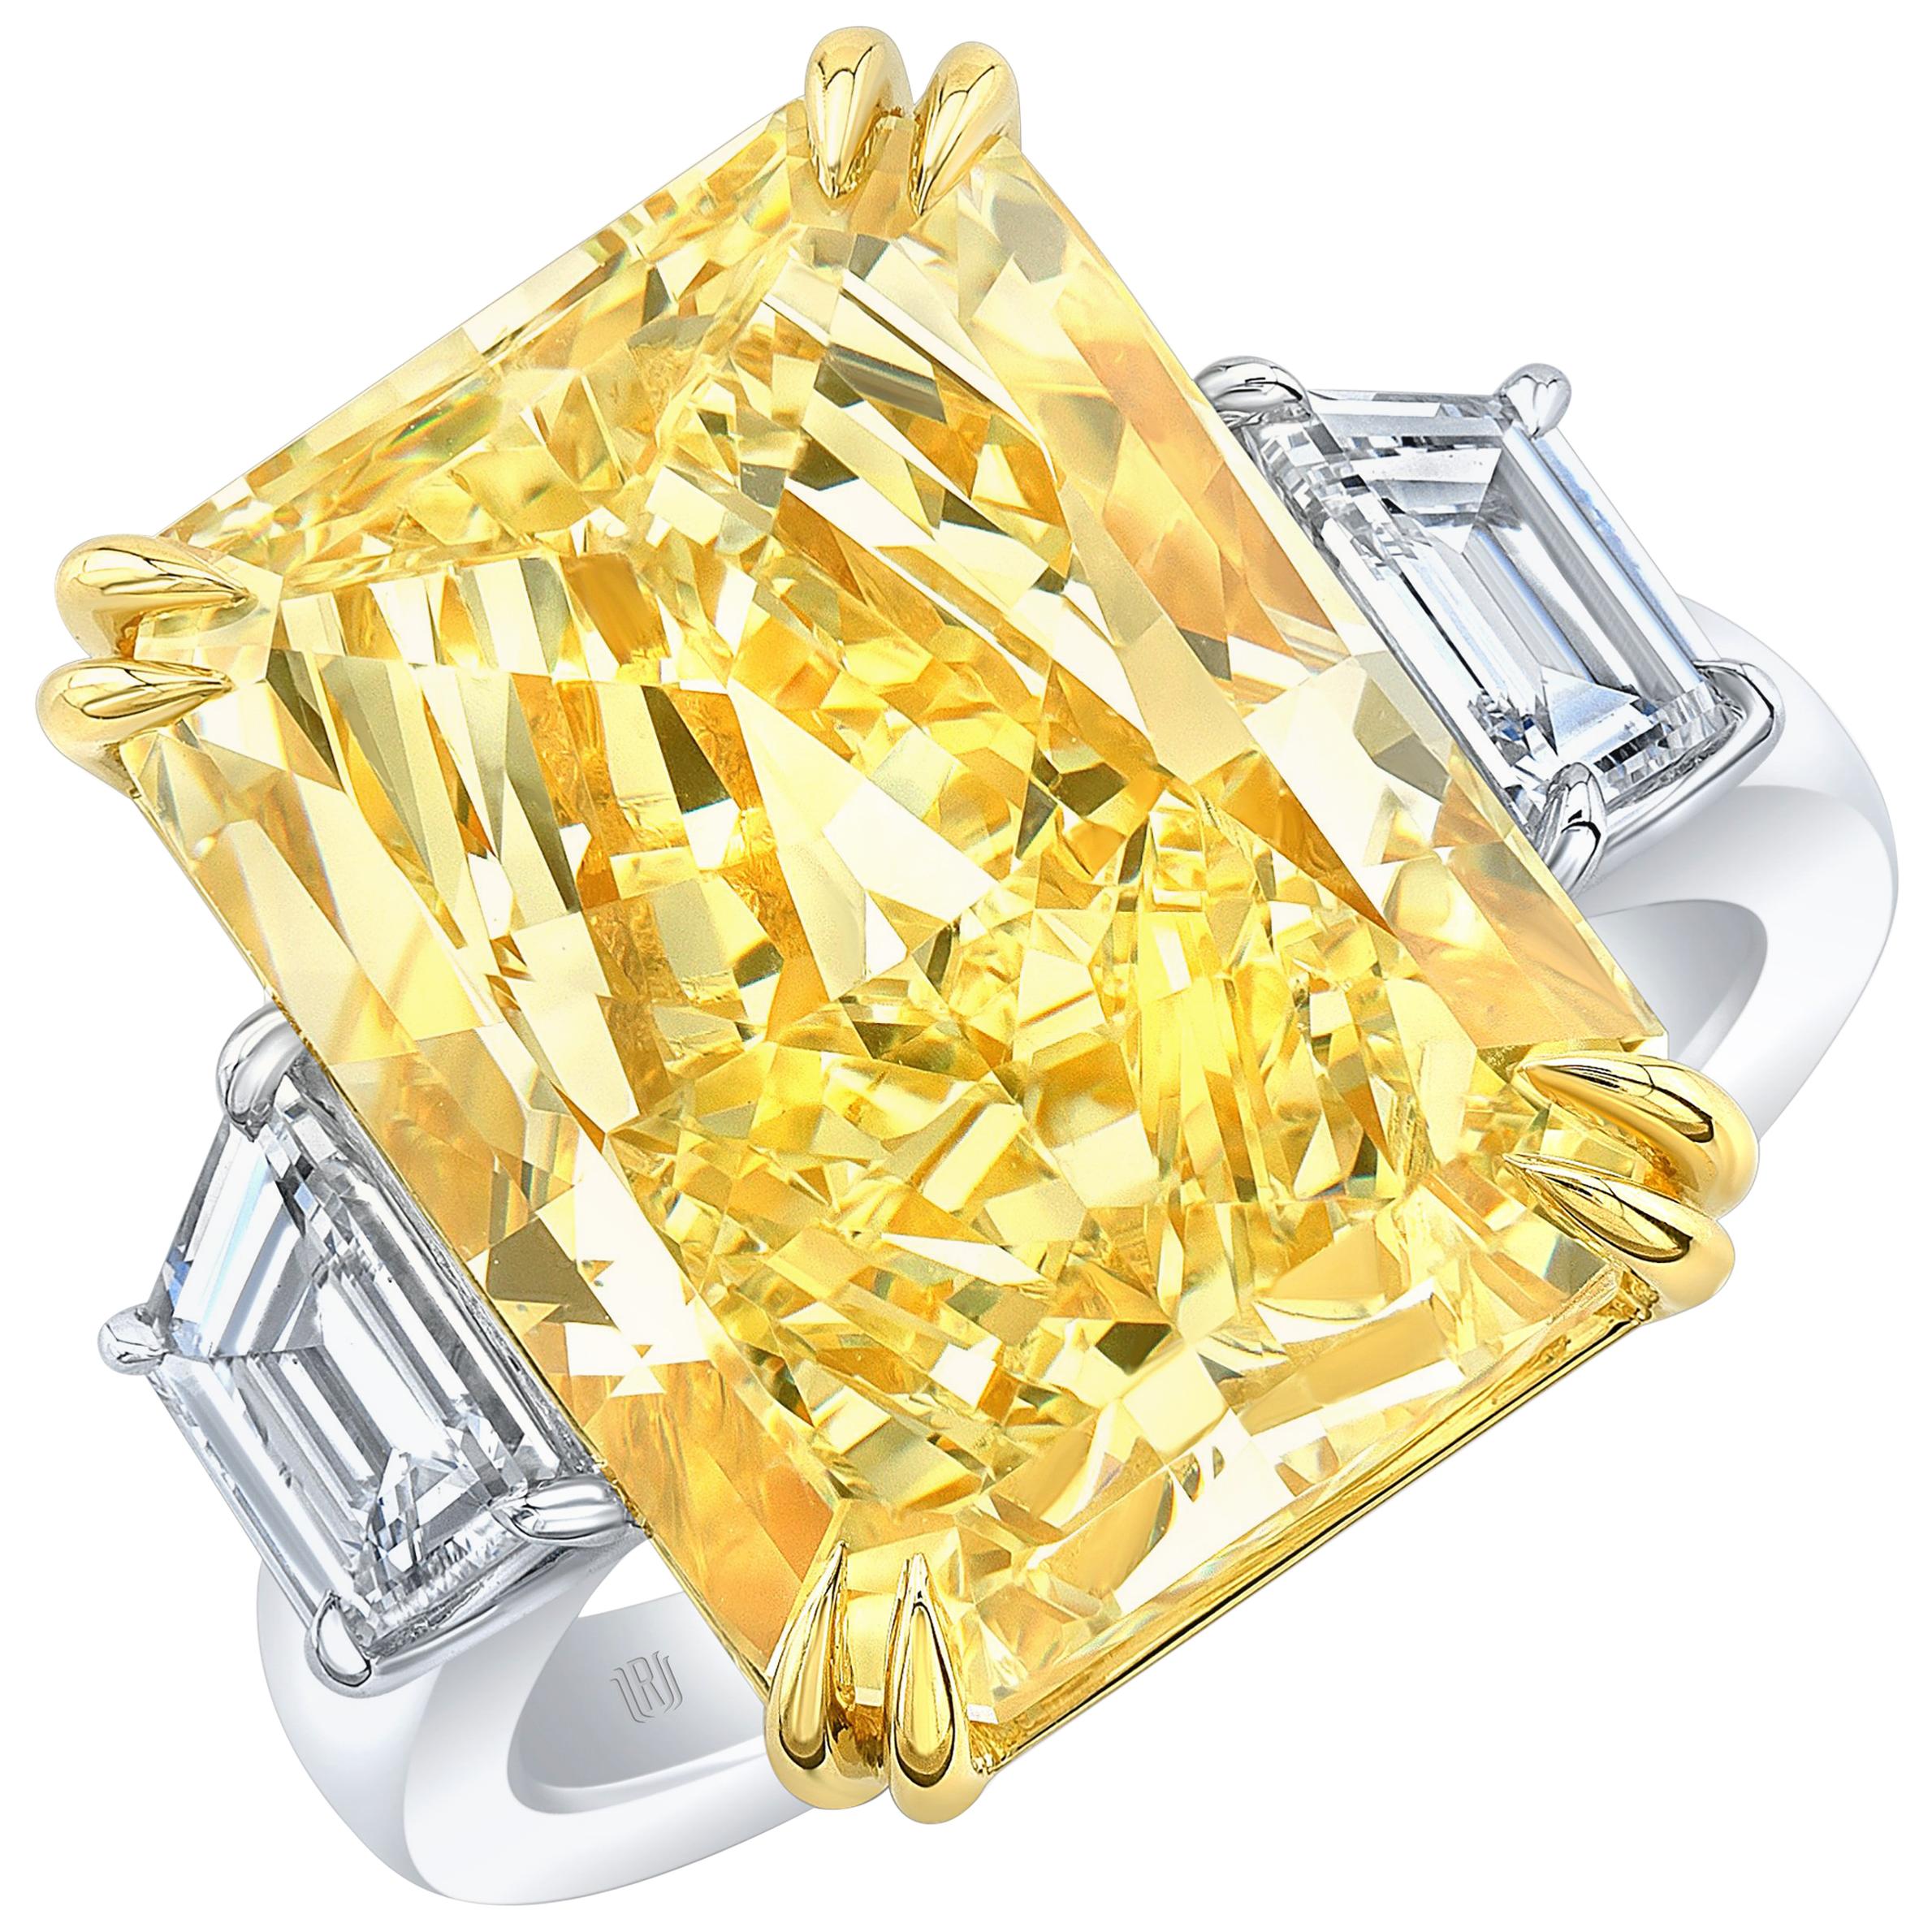 GIA Certified 17.01 Carat Fancy Yellow Radiant VS2 Diamond Engagement Ring For Sale